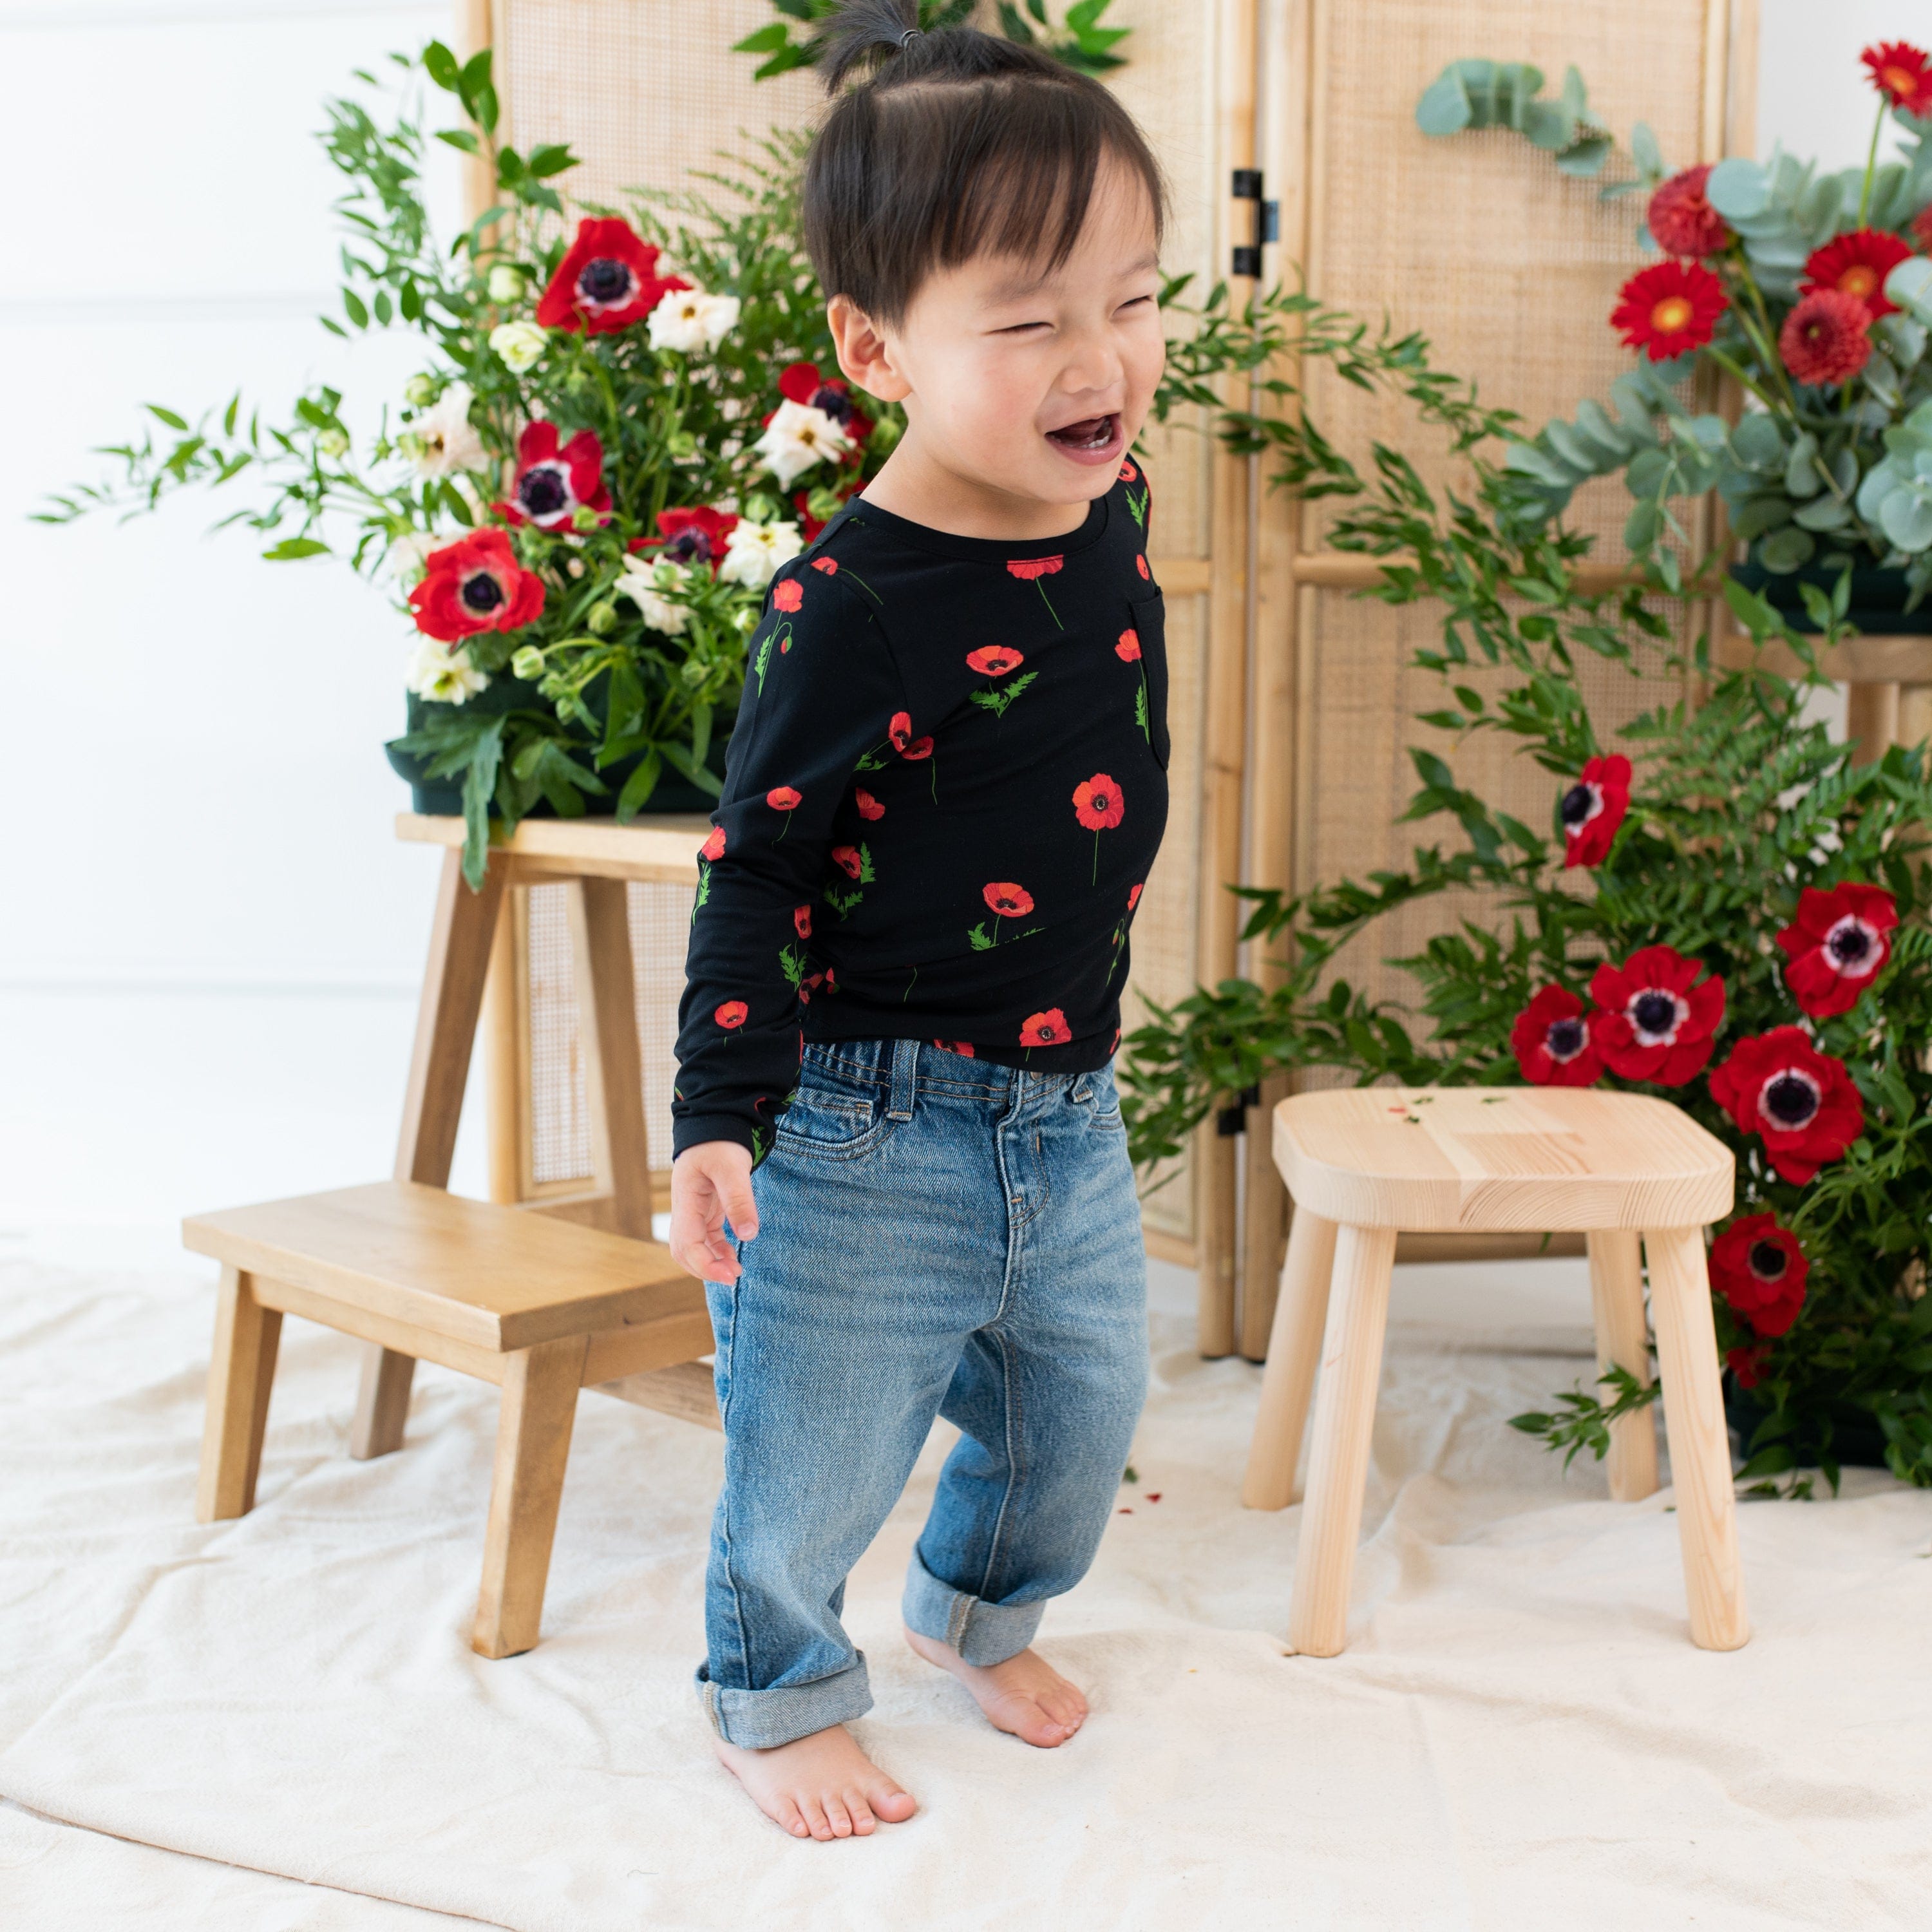 Kyte Baby Toddler Unisex Tee Long Sleeve Toddler Crew Neck Tee in Midnight Poppies